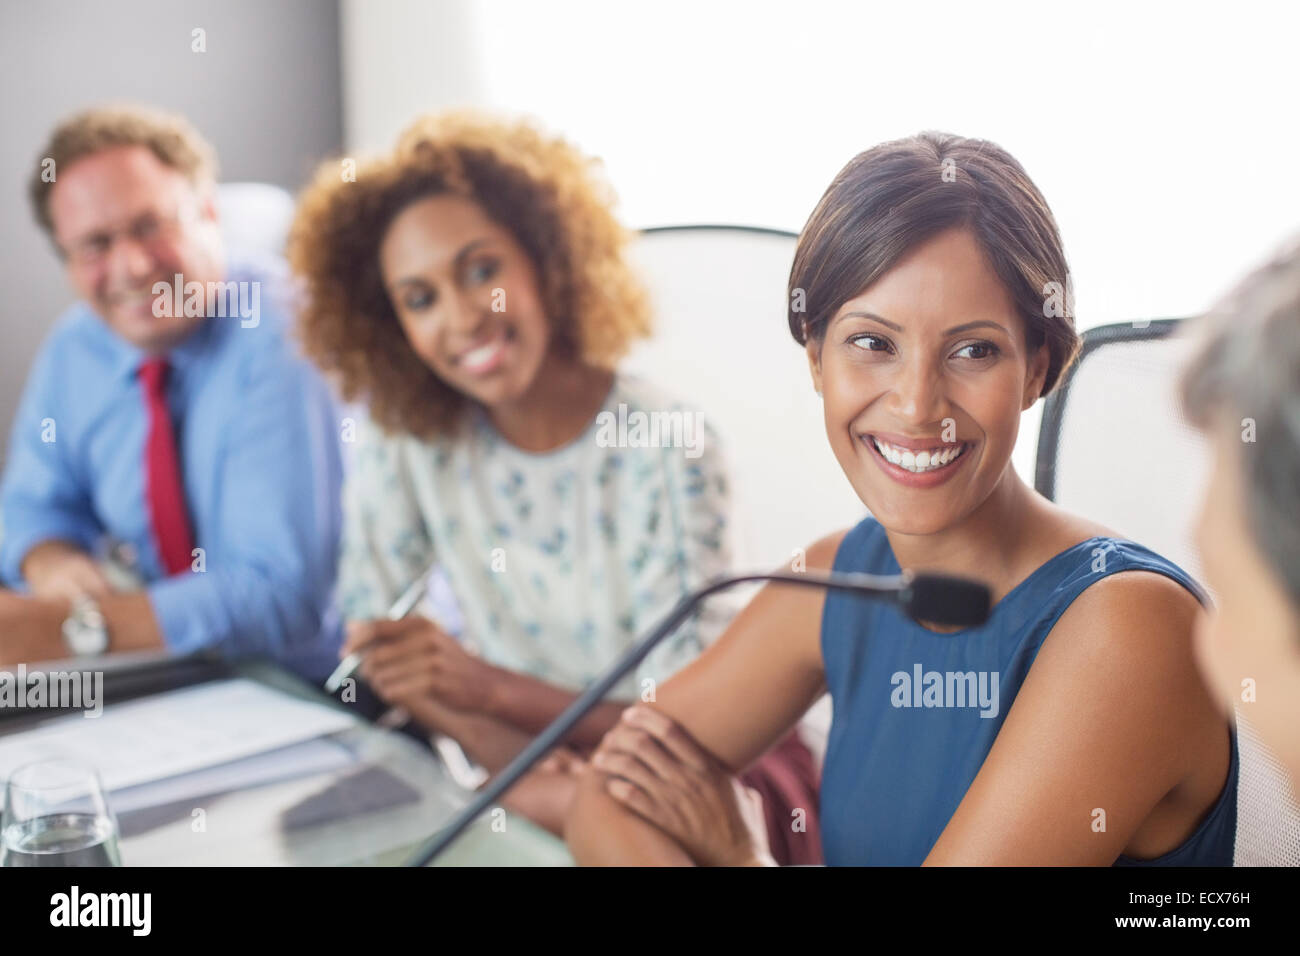 Portrait of smiling woman sitting at conference table Stock Photo